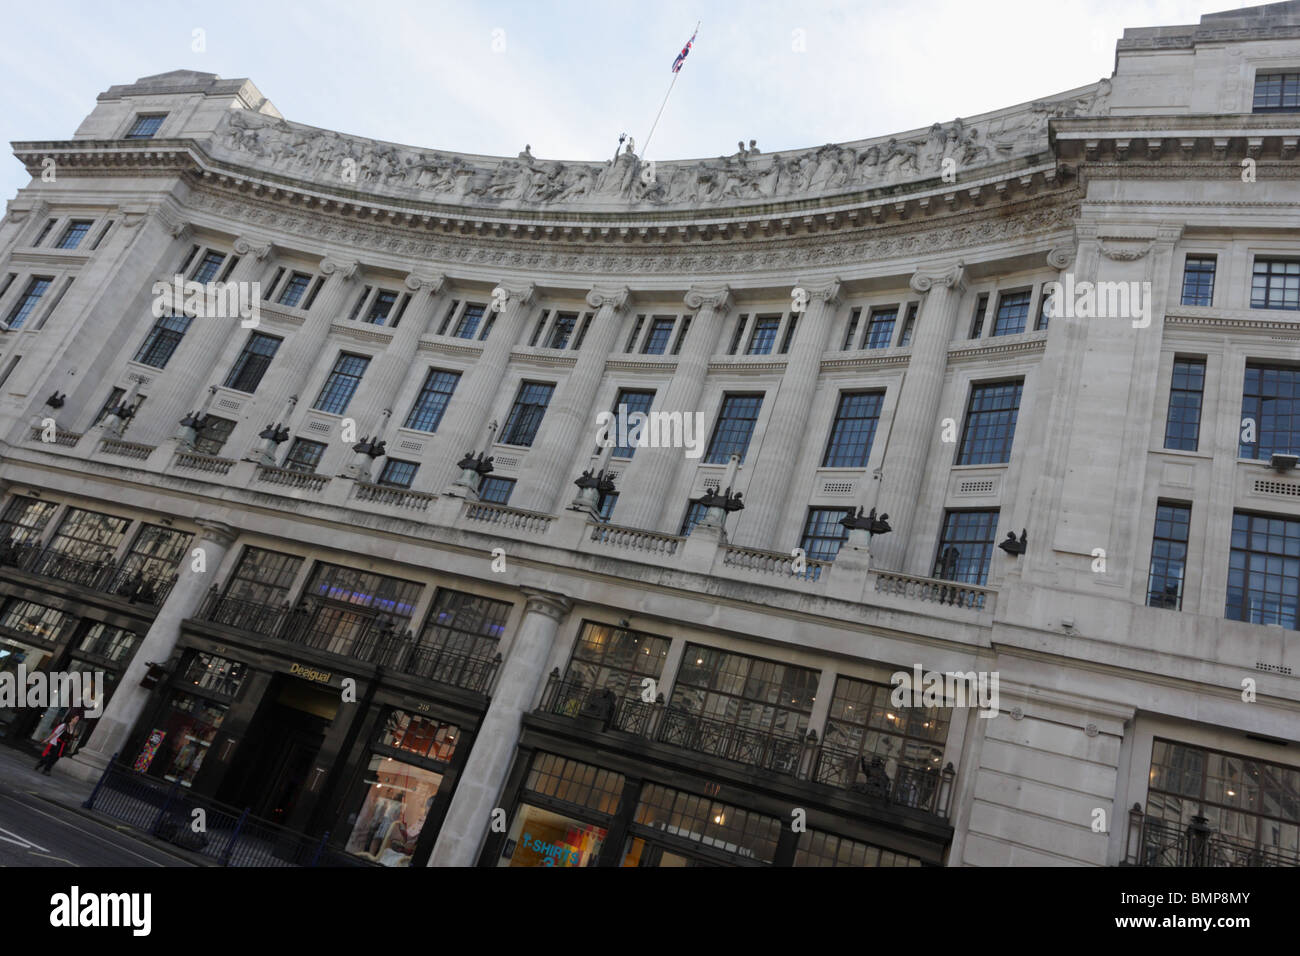 Landscape image of 218 Regent Street in London's West End shopping district. Stock Photo